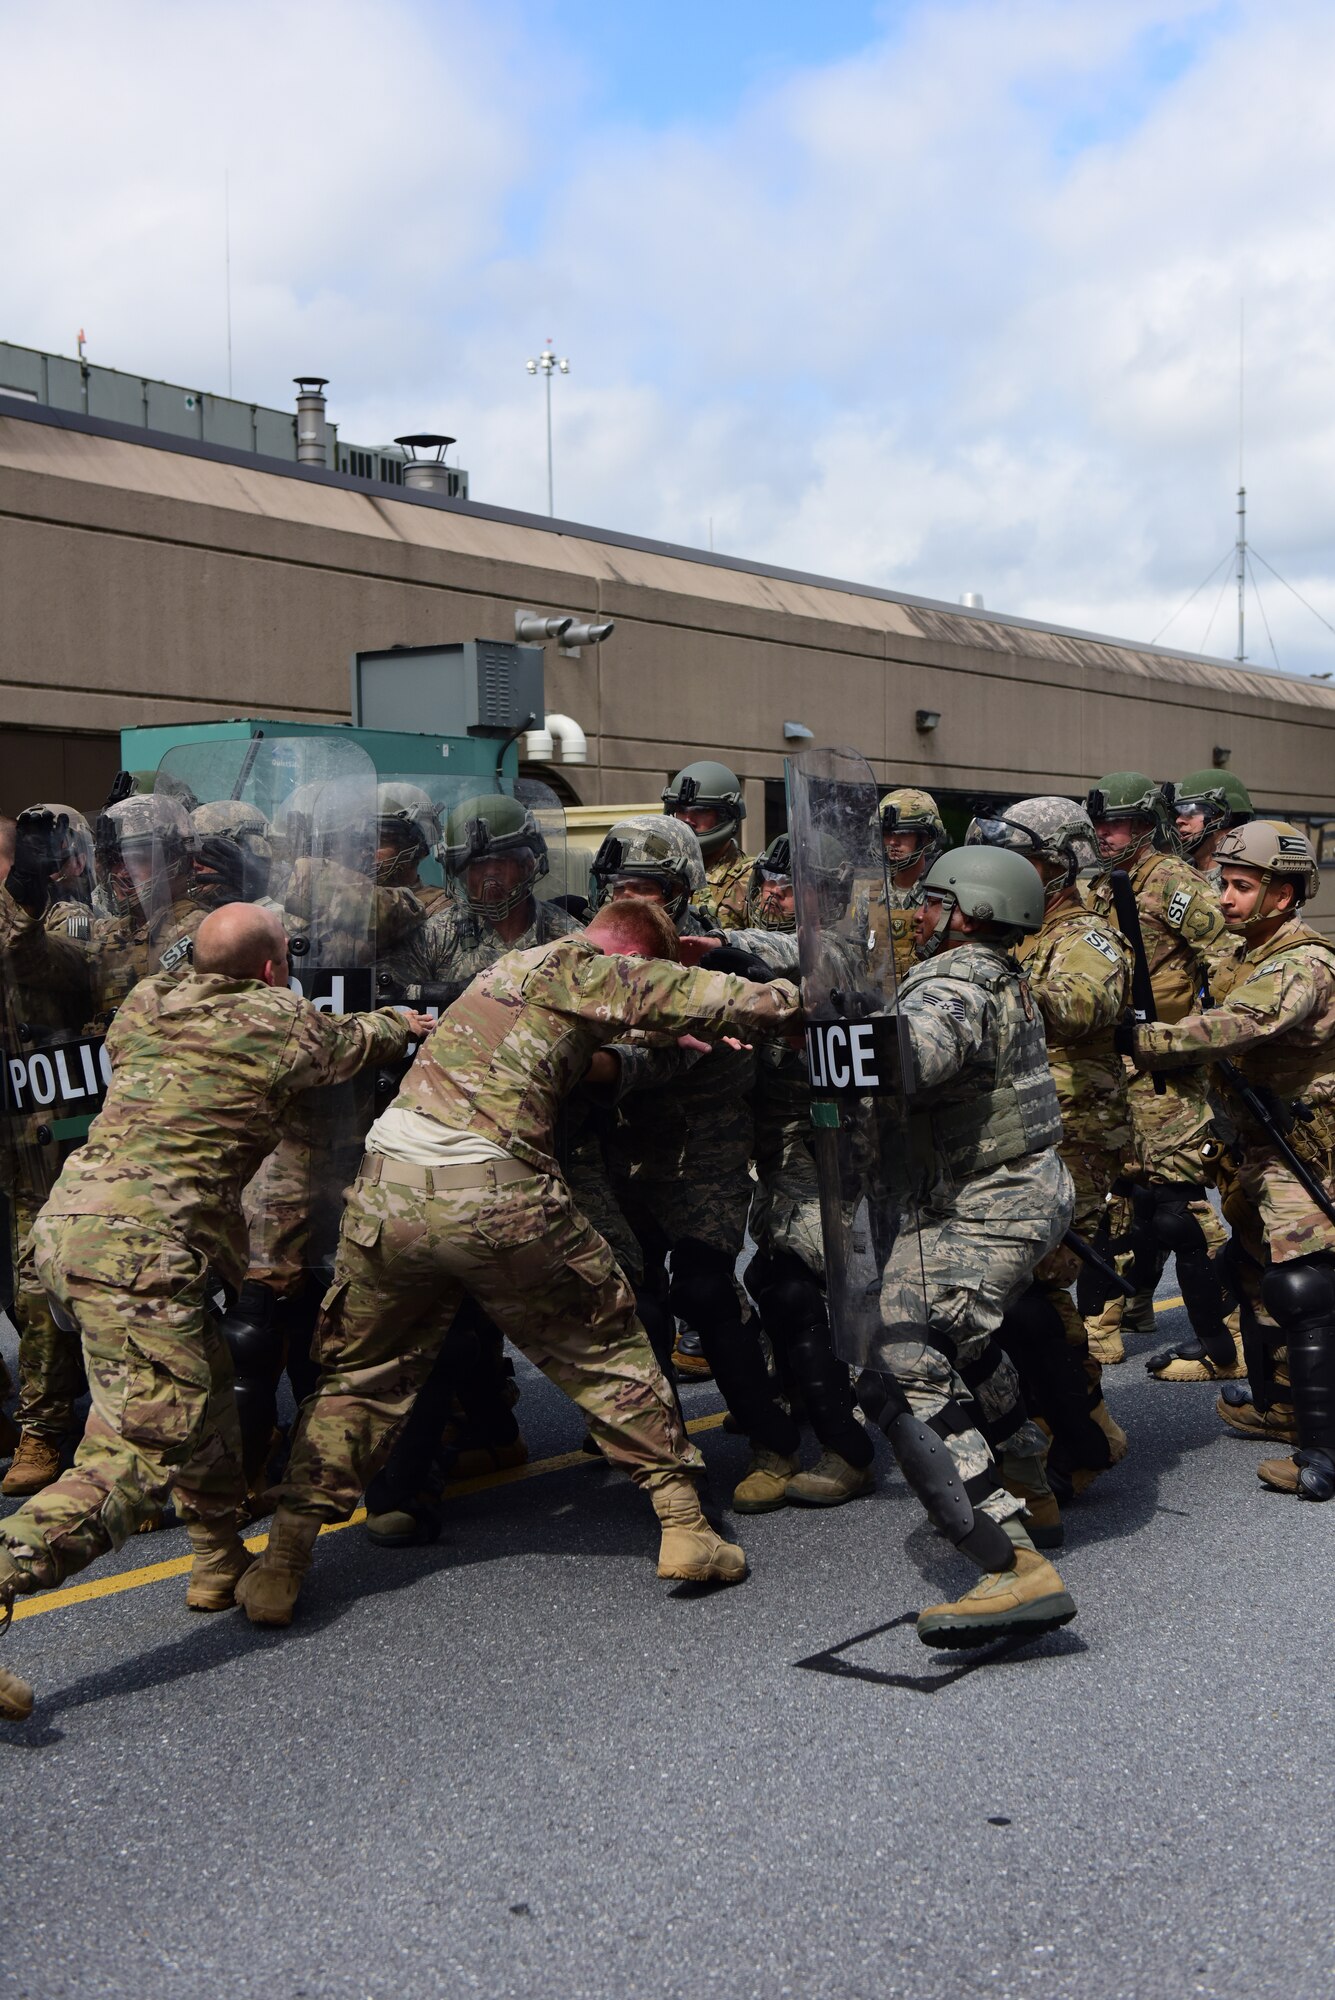 Security forces specialists from the 193rd Special Operations Security Forces Squadron, Middletown, Pennsylvania, Pennsylvania Air National Guard, conduct riot control countermeasures training July 22, 2018. The 193rd SOSFS Airmen participate in this two times a year as part of their required domestic operations training. (U.S. Air National Guard photo by Senior Airman Julia Sorber/Released)